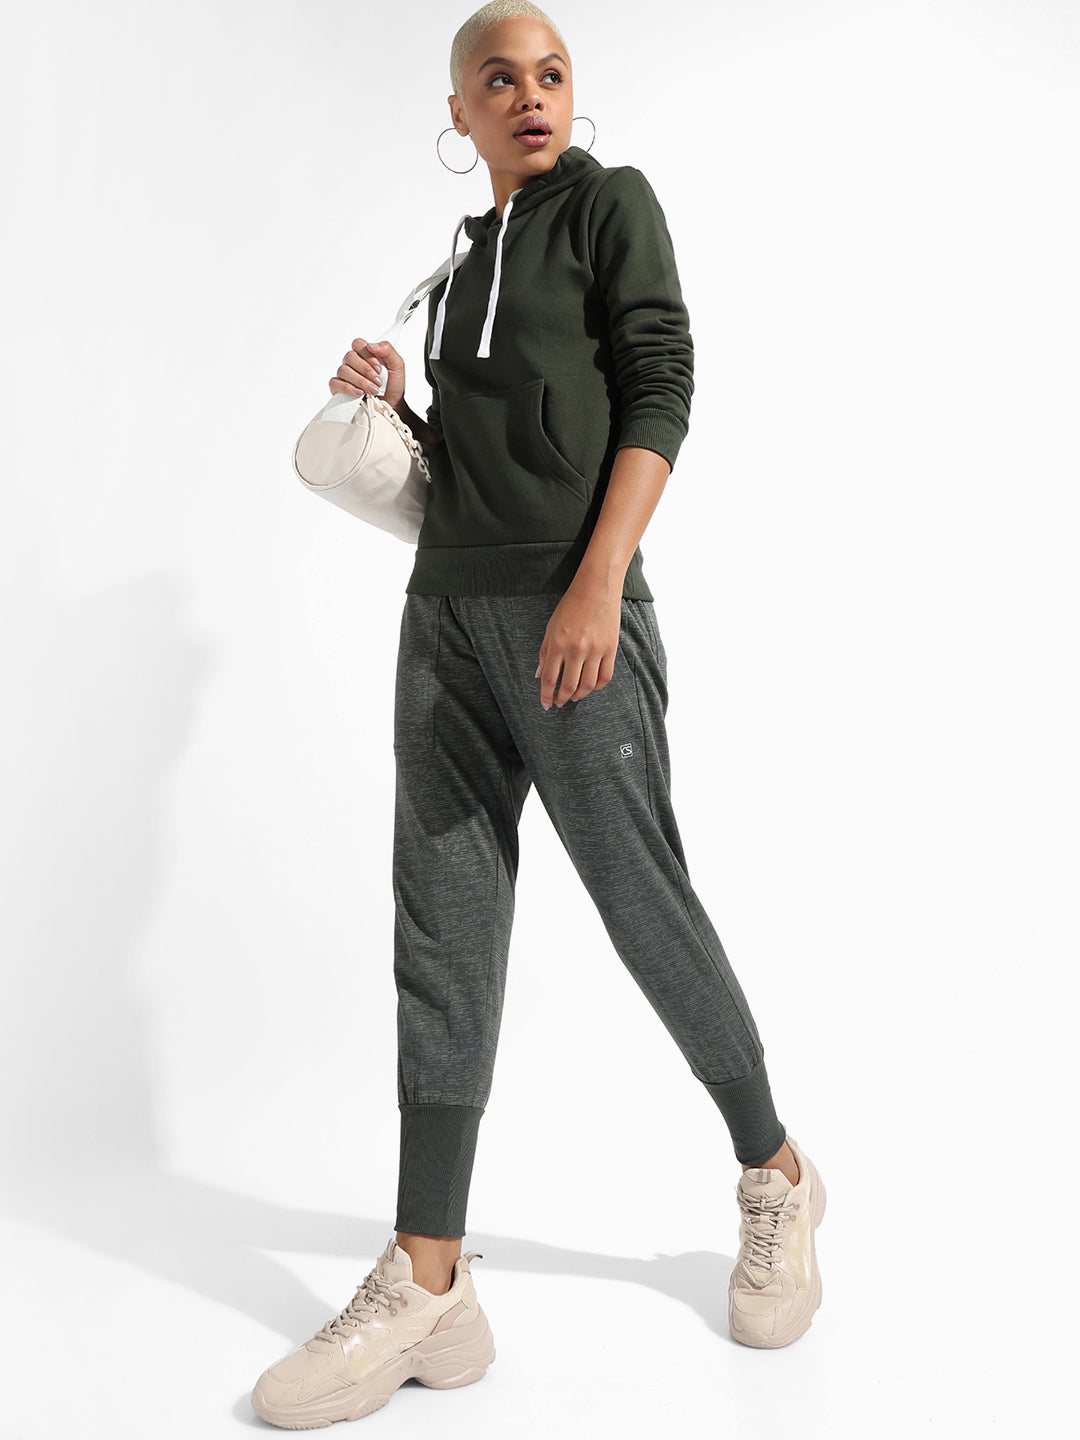 Cotton Textured Regular Fit Tracksuit For Casual Wear